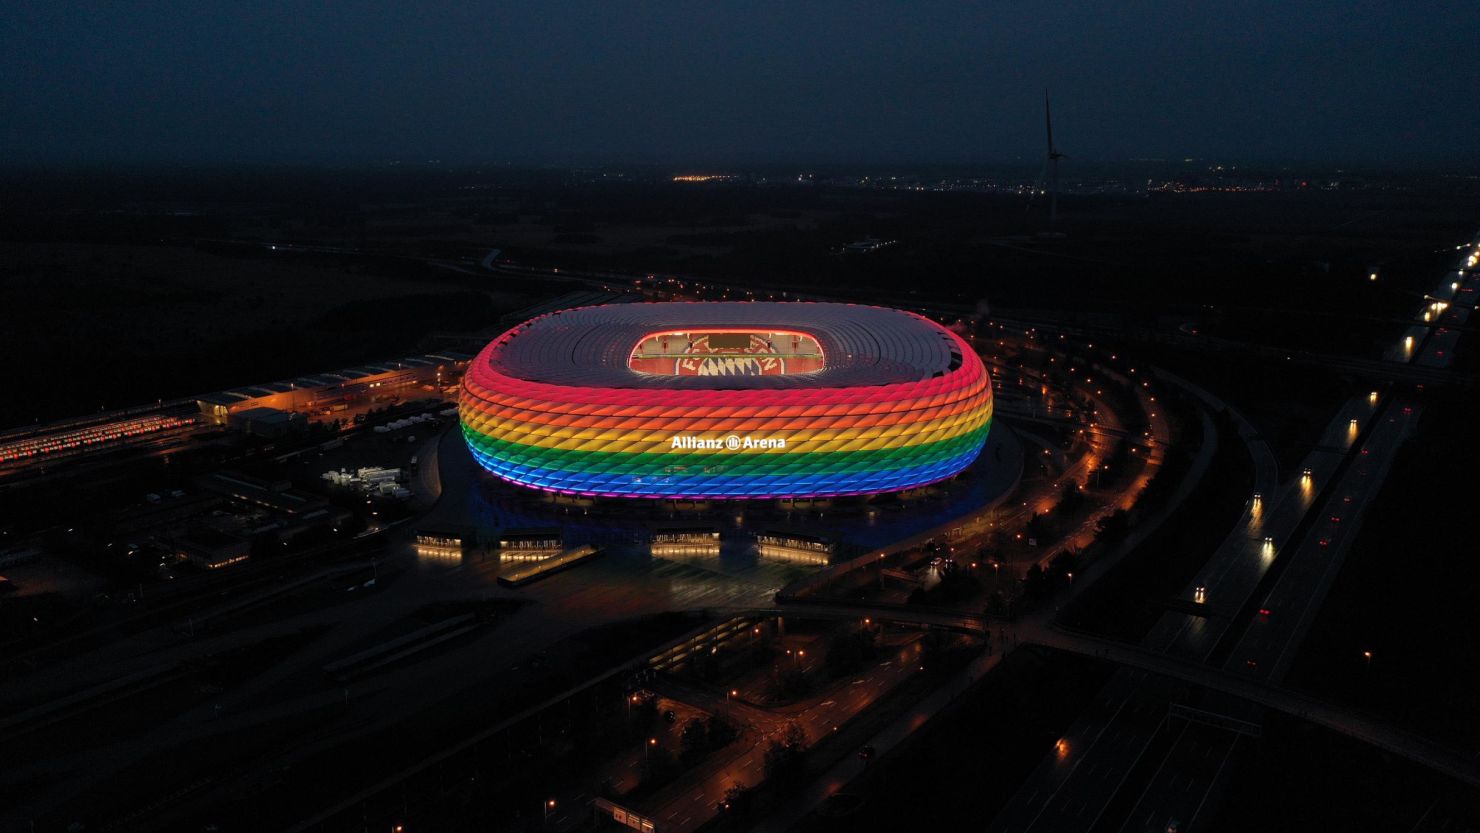 Munich's Allianz Arena is illuminated in rainbow colors during the Bundesliga match between Bayern Munich and Hoffenheim on January 30, 2021.